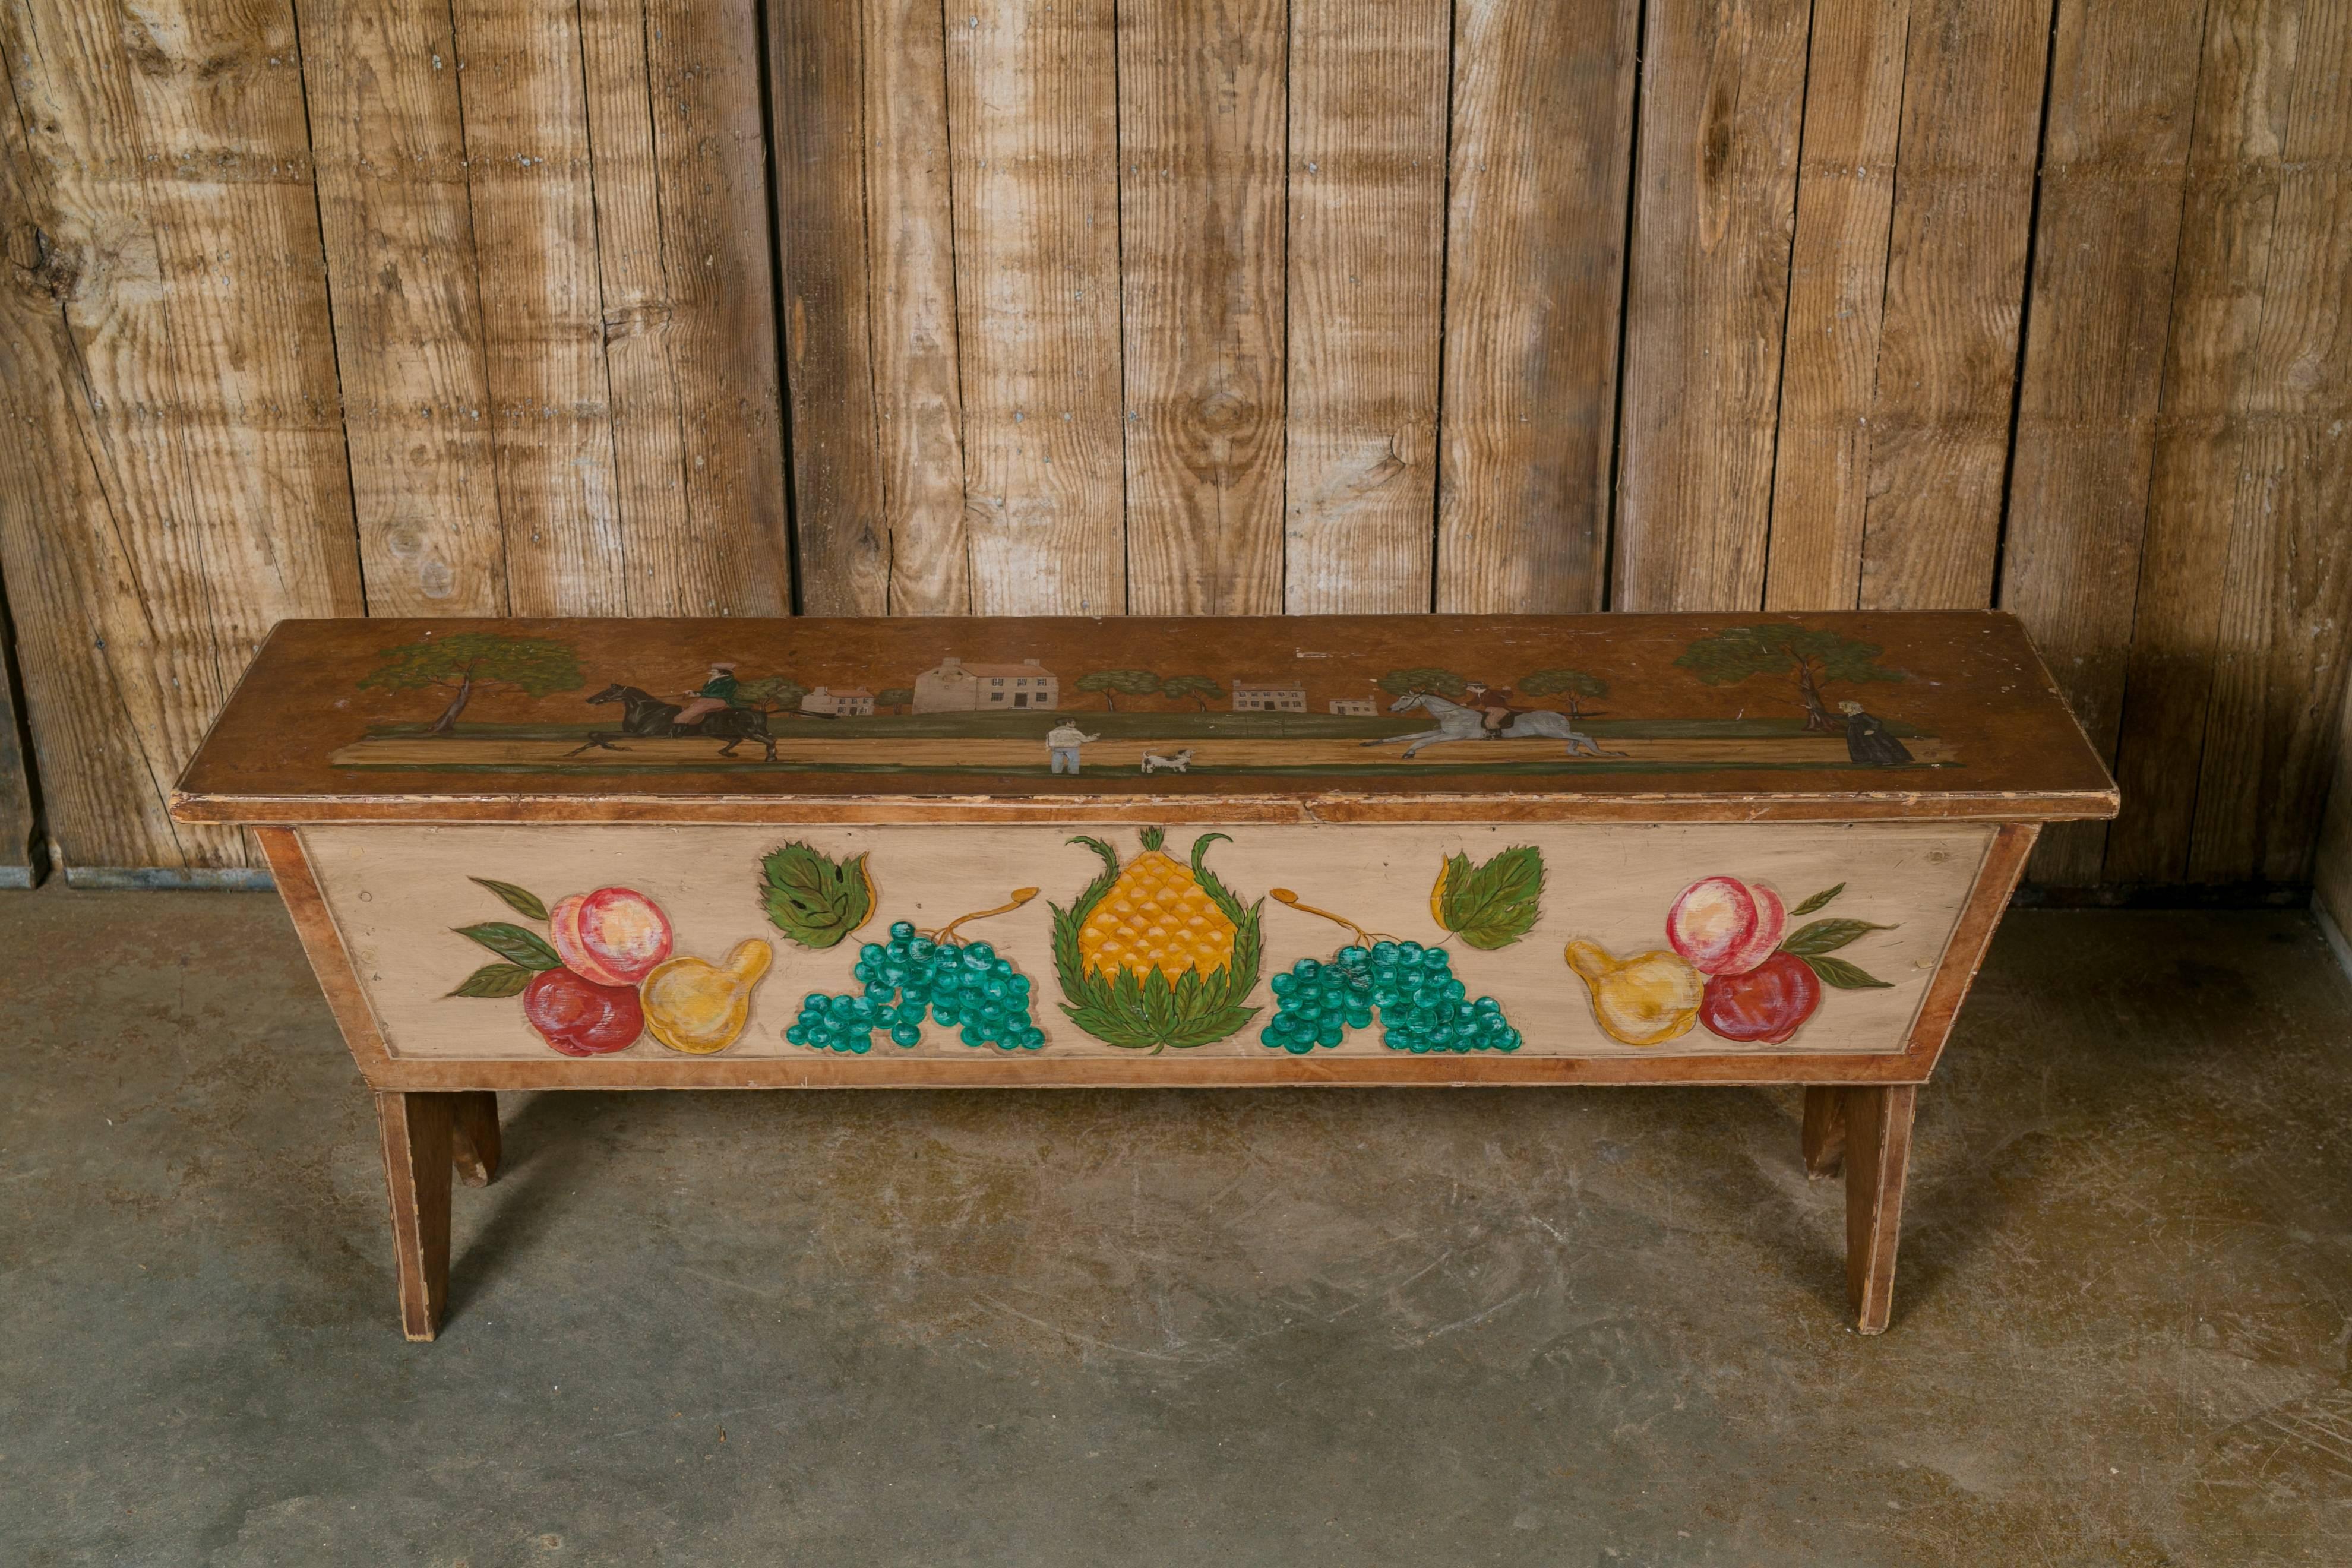 American Colonial Antique Wooden Bench Hand-Painted by Artist Lew Hudnall, circa 1890